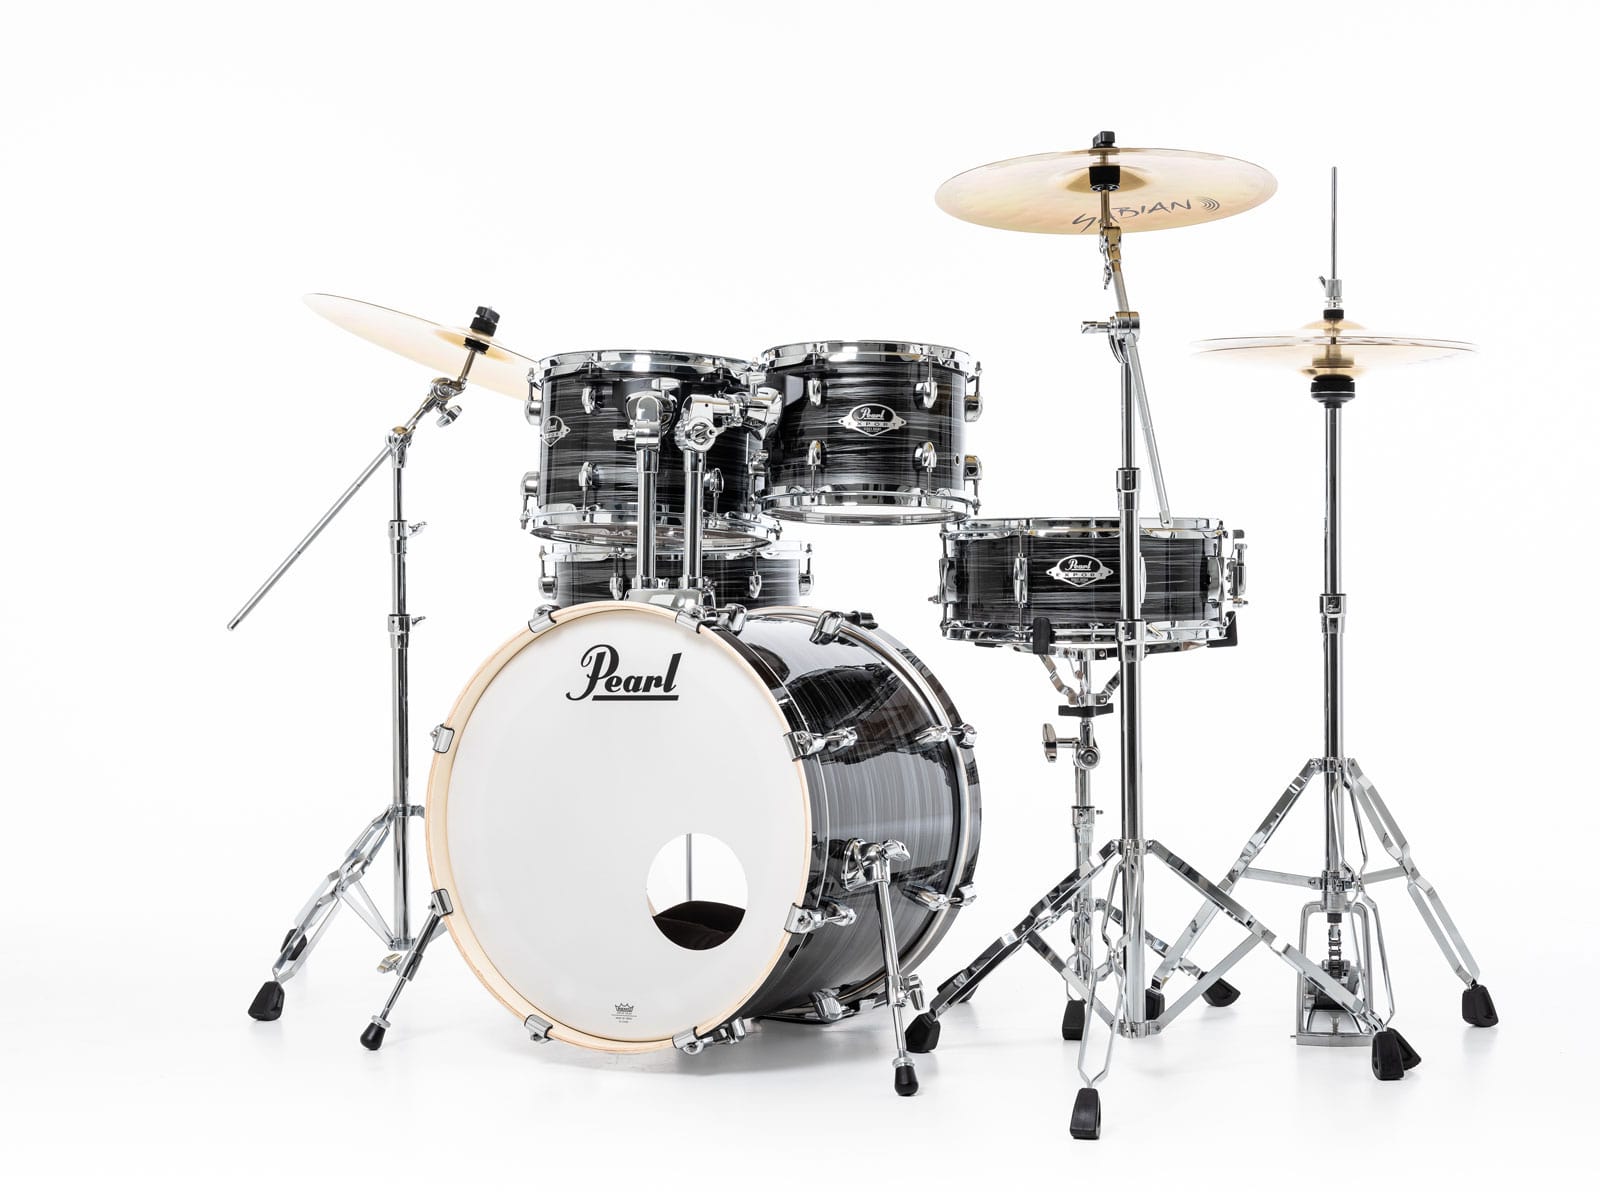 PEARL DRUMS EXPORT FUSION 20 GRAPHITE SILVER TWIST